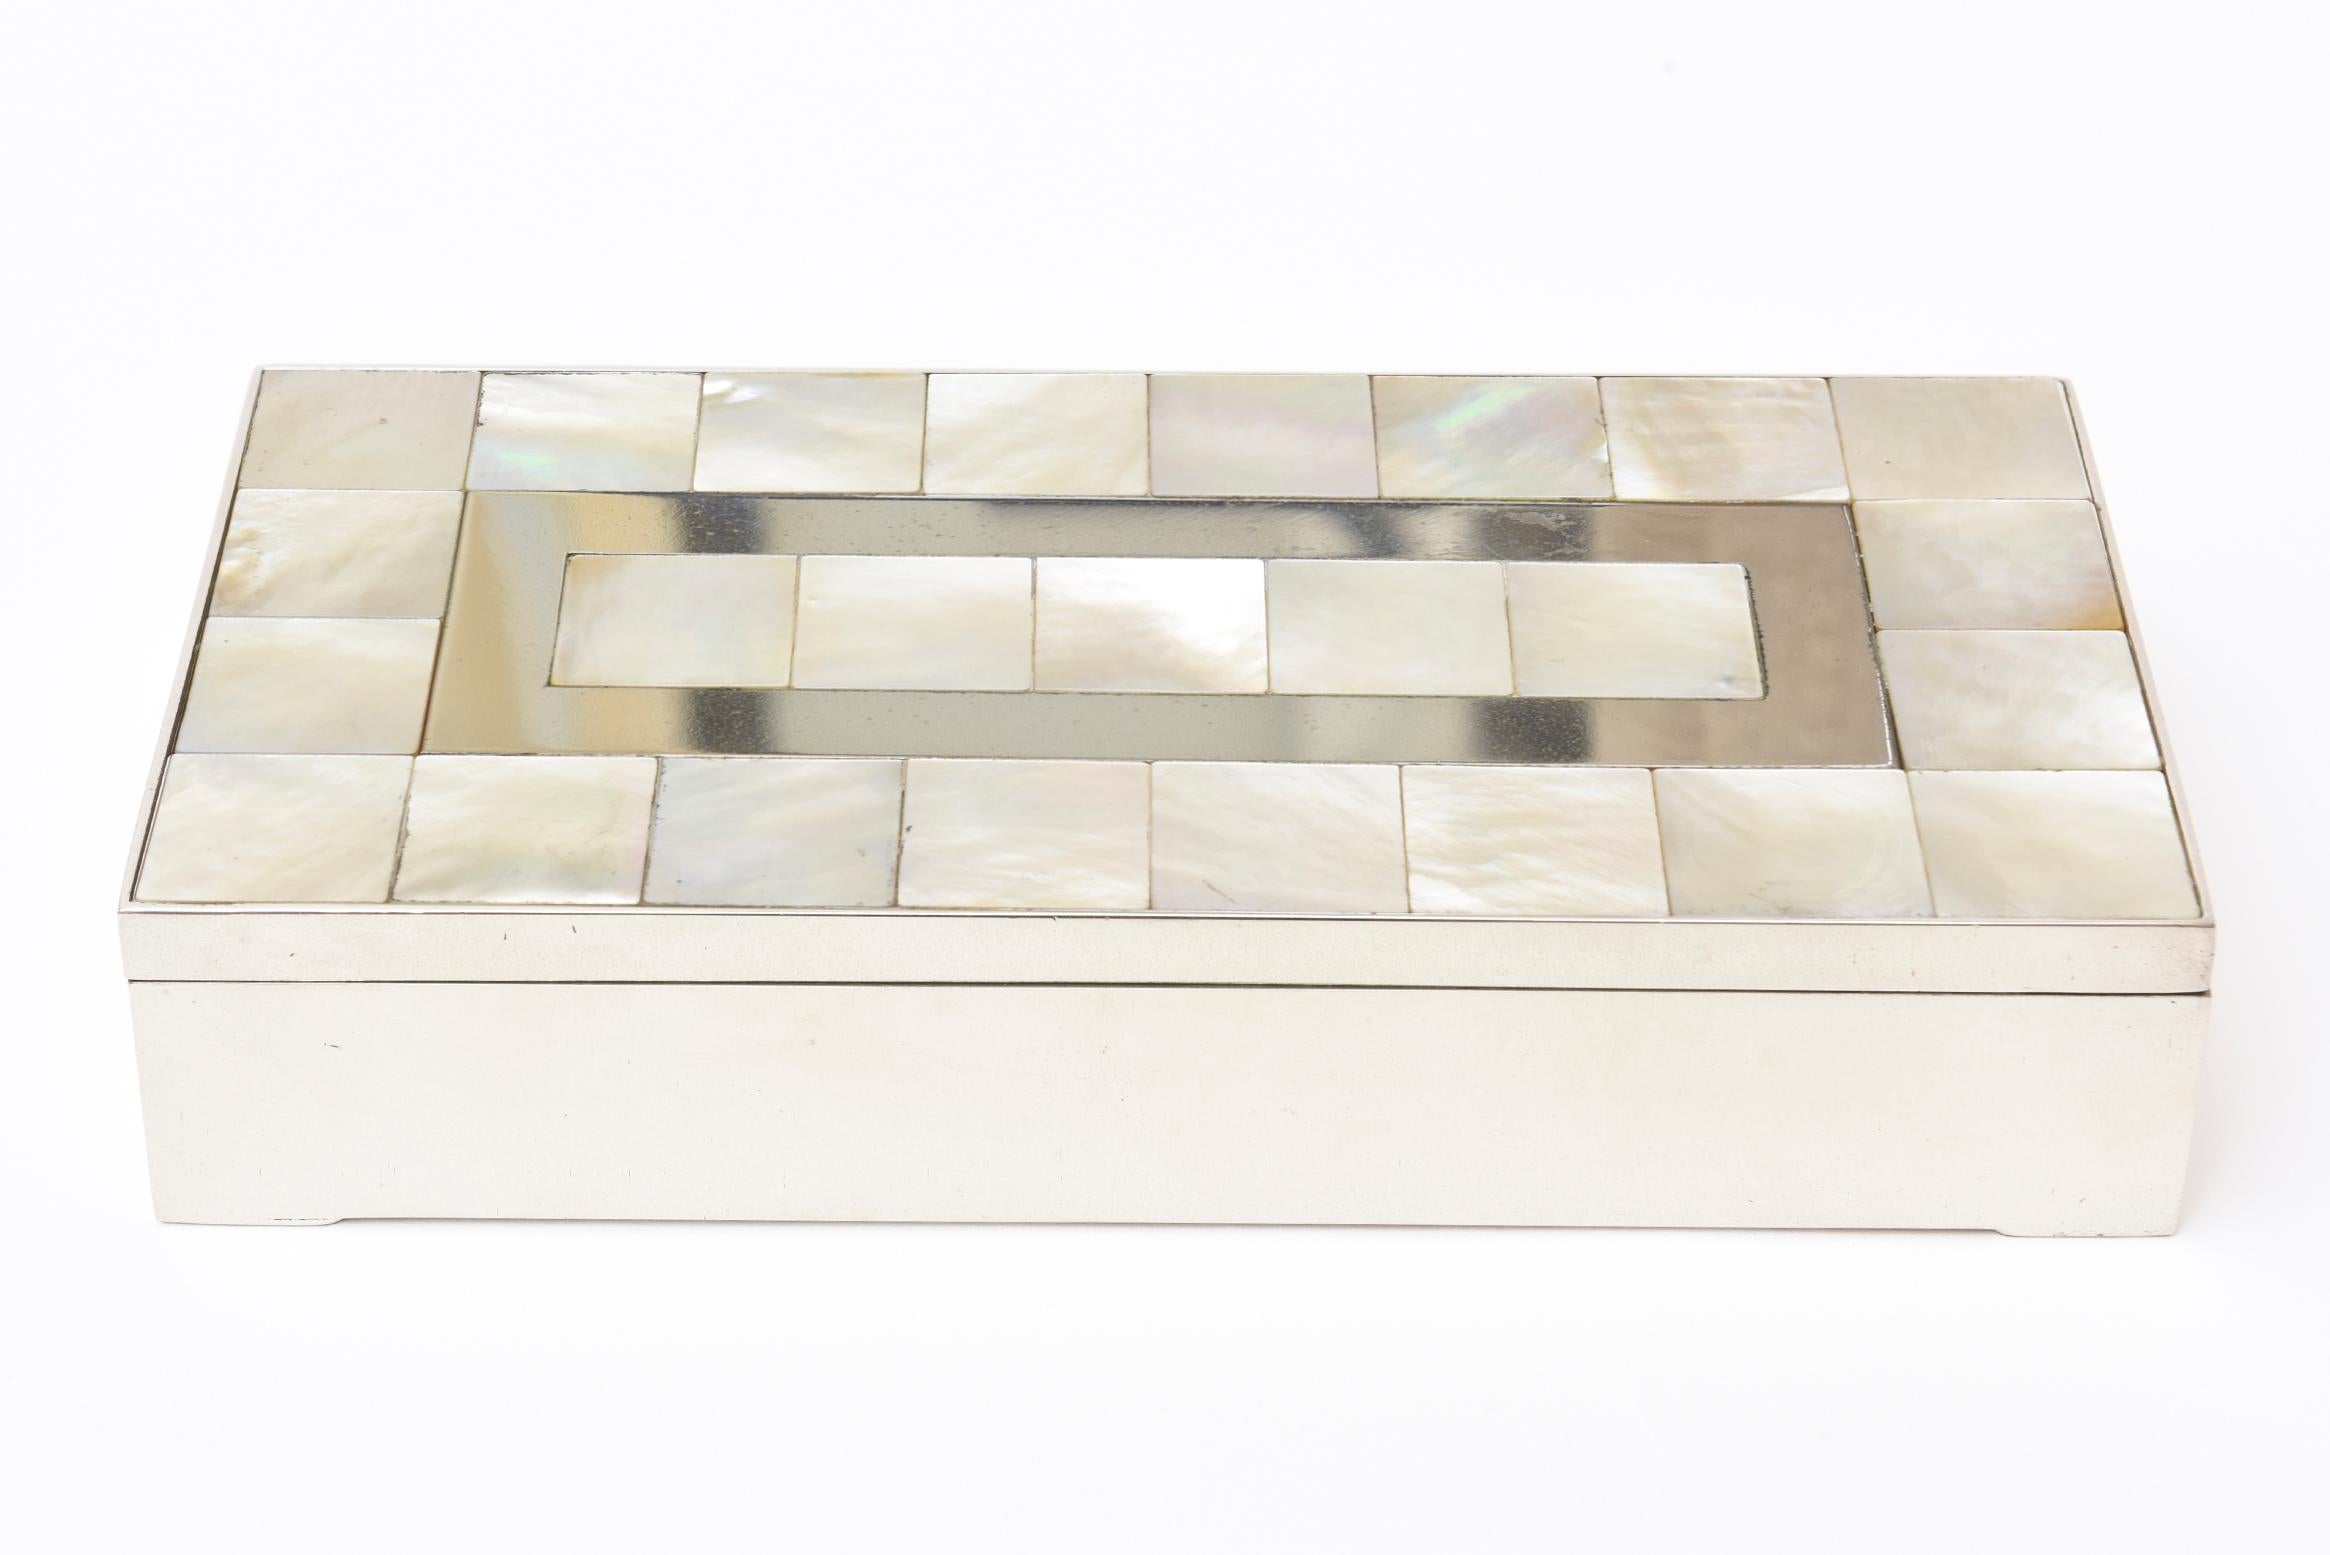 This lovely vintage rectangular mother-of-pearl, nickel silver and wood hinged box is a great object for a desk accessory, console table or a great box for any cocktail table. It has an original light wood interior that has not been restored or